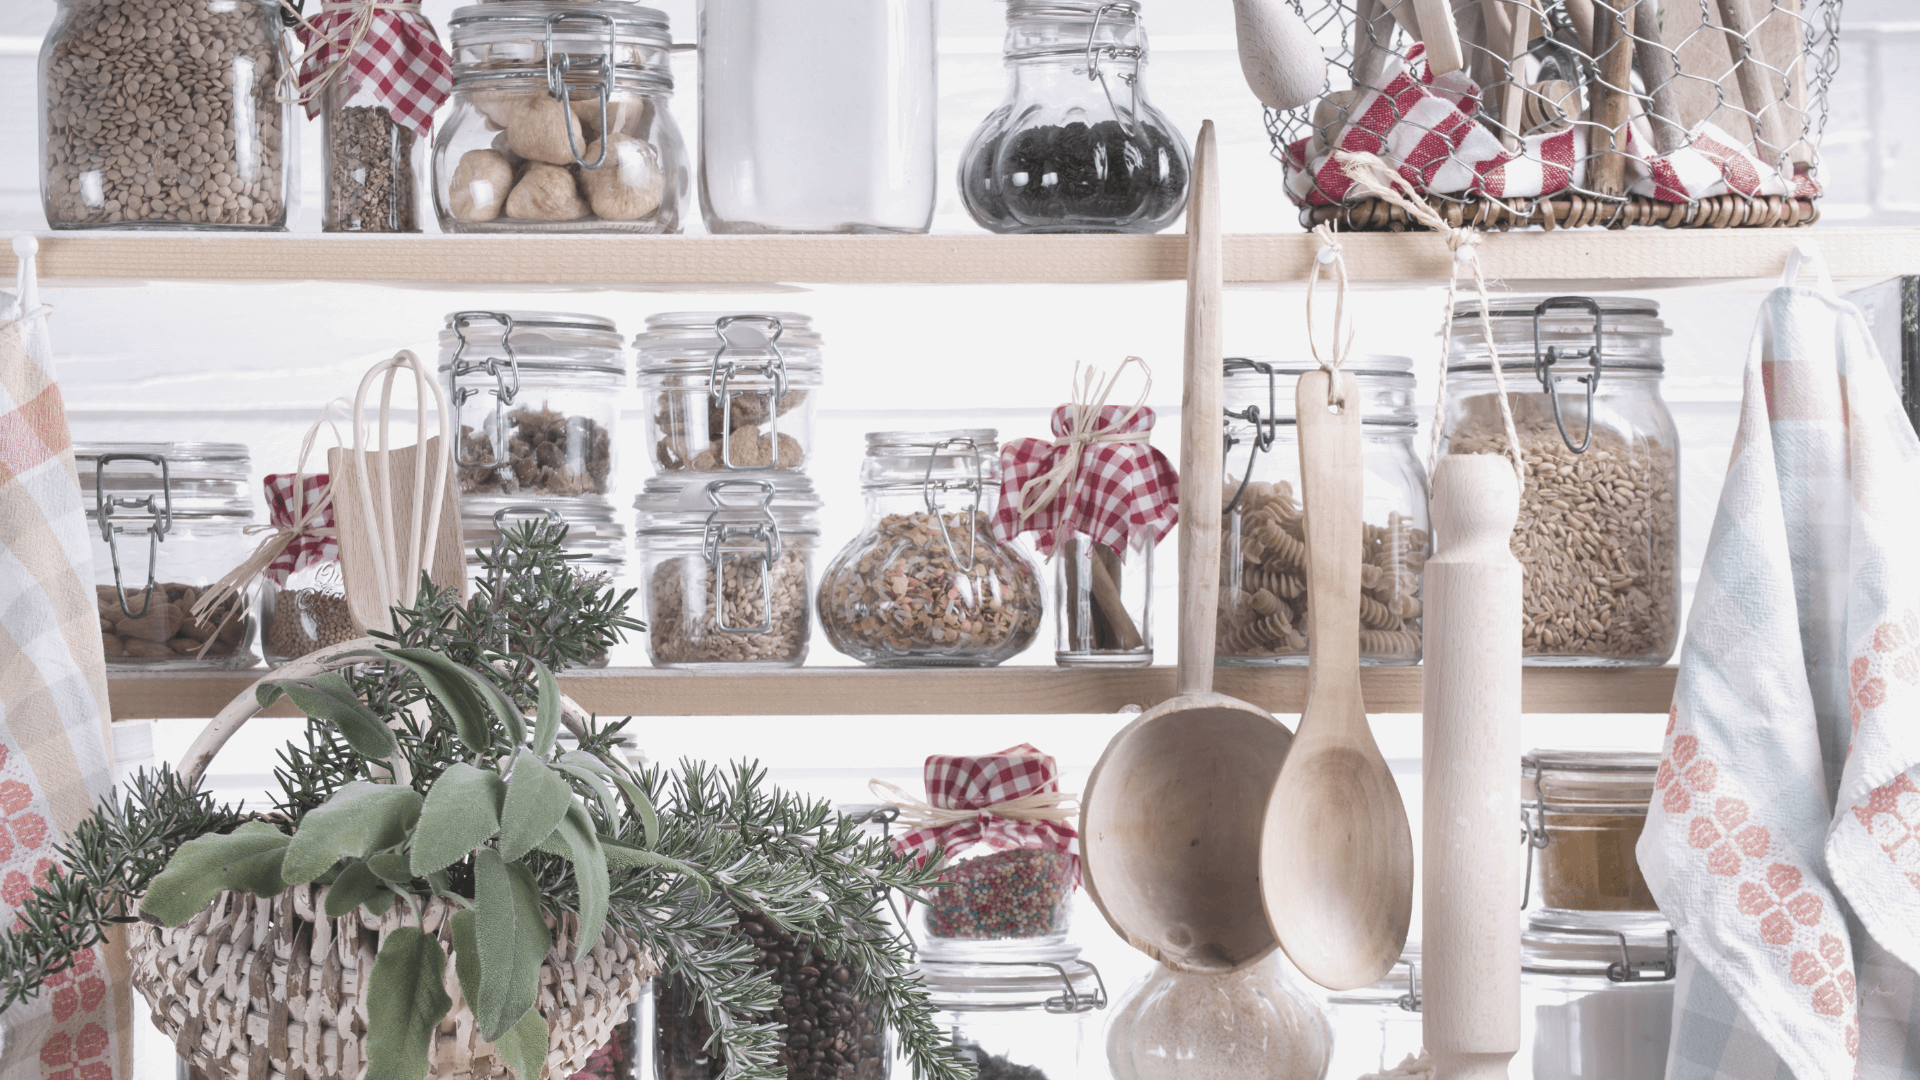 Prepared Pantry {Stocking a Healthy Pantry}